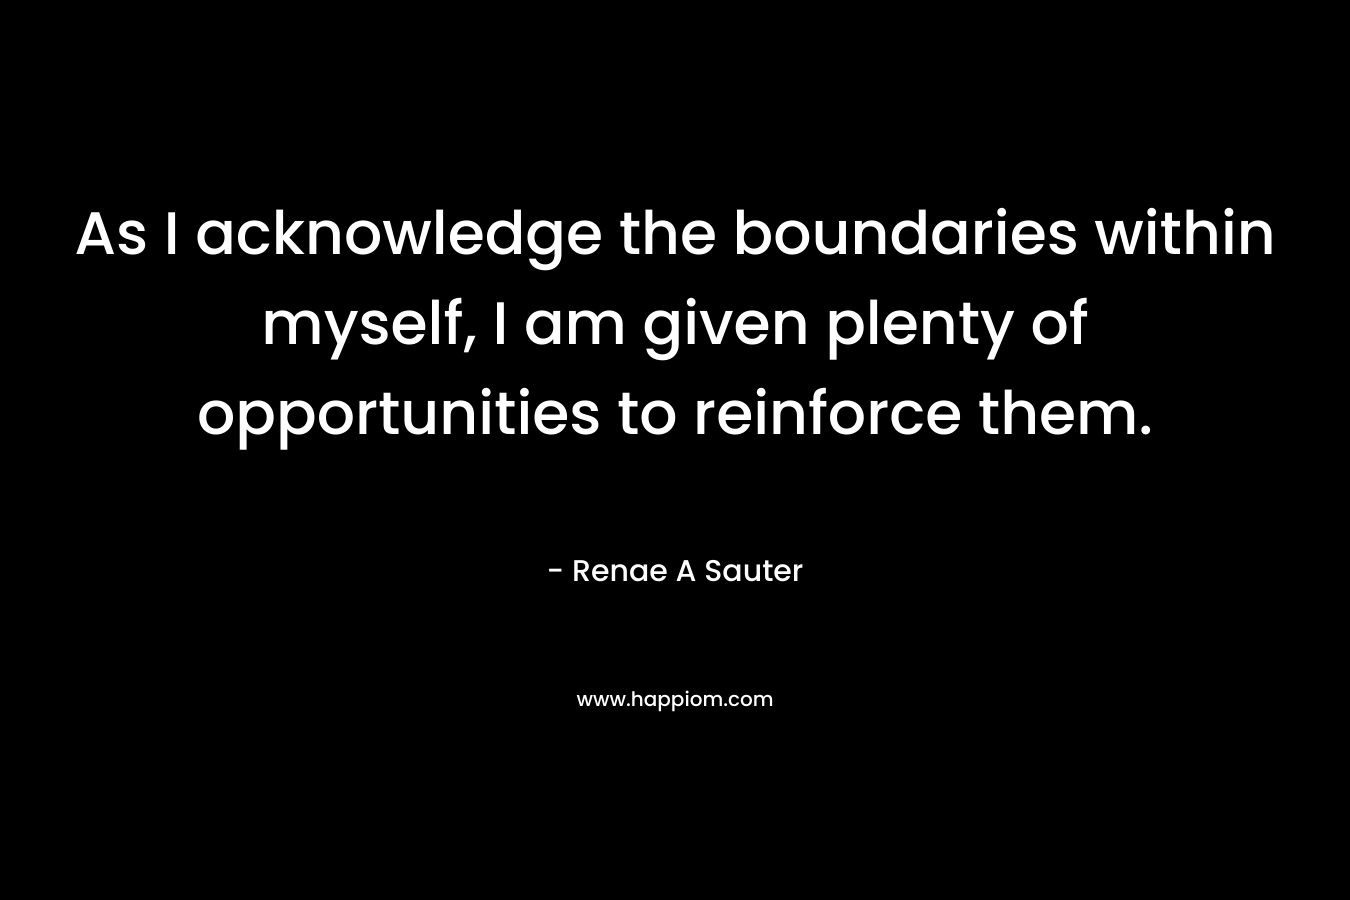 As I acknowledge the boundaries within myself, I am given plenty of opportunities to reinforce them.